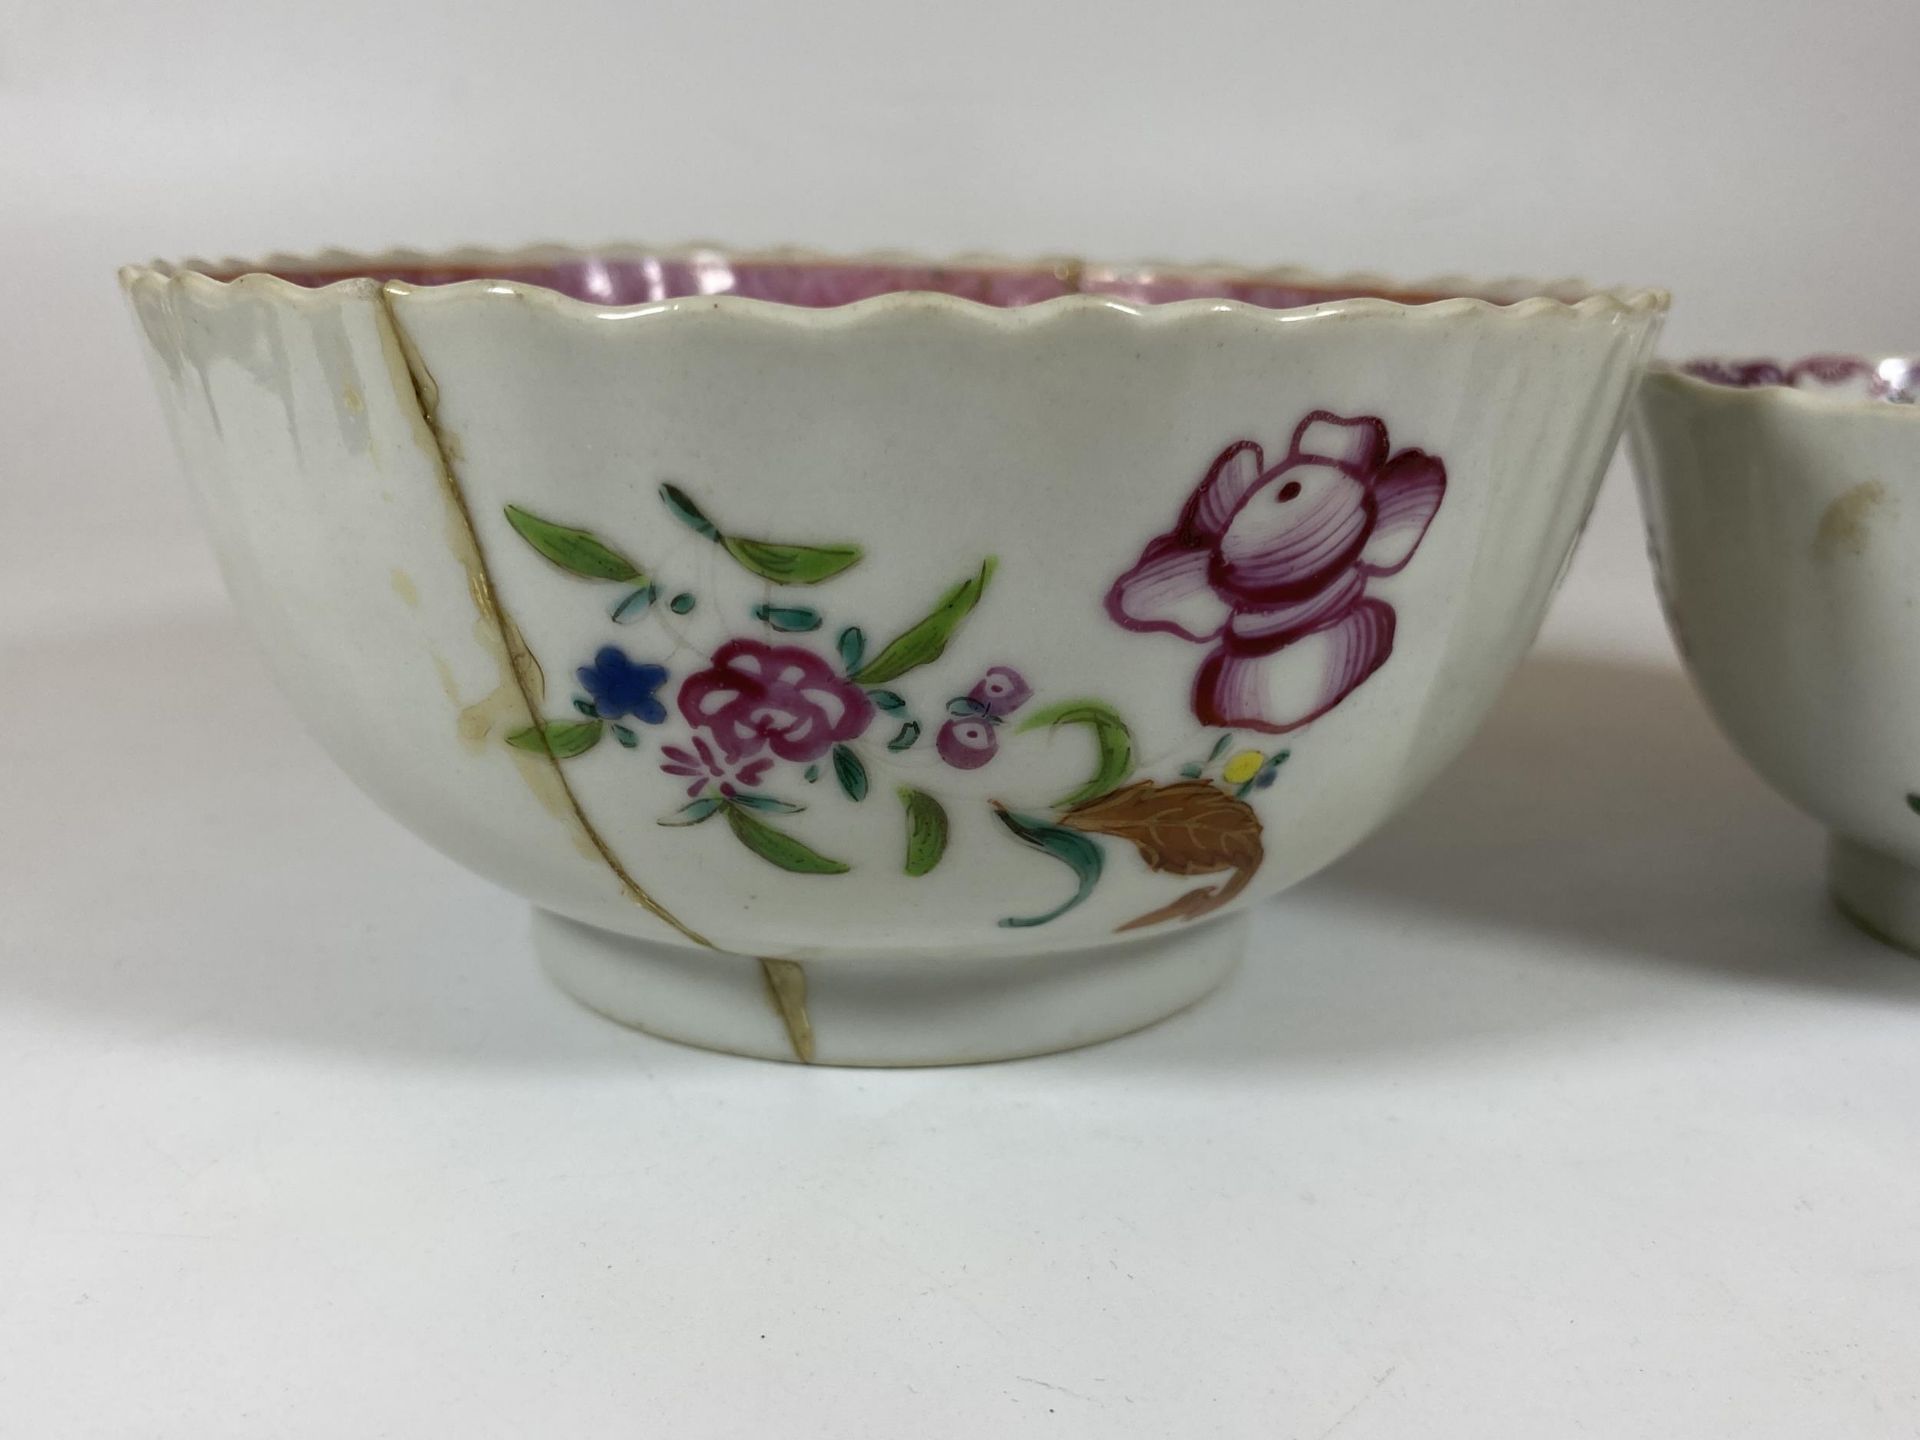 TWO 19TH CENTURY CHINESE FAMILLE ROSE BOWLS, LARGEST DIAMETER 14CM - Image 2 of 5